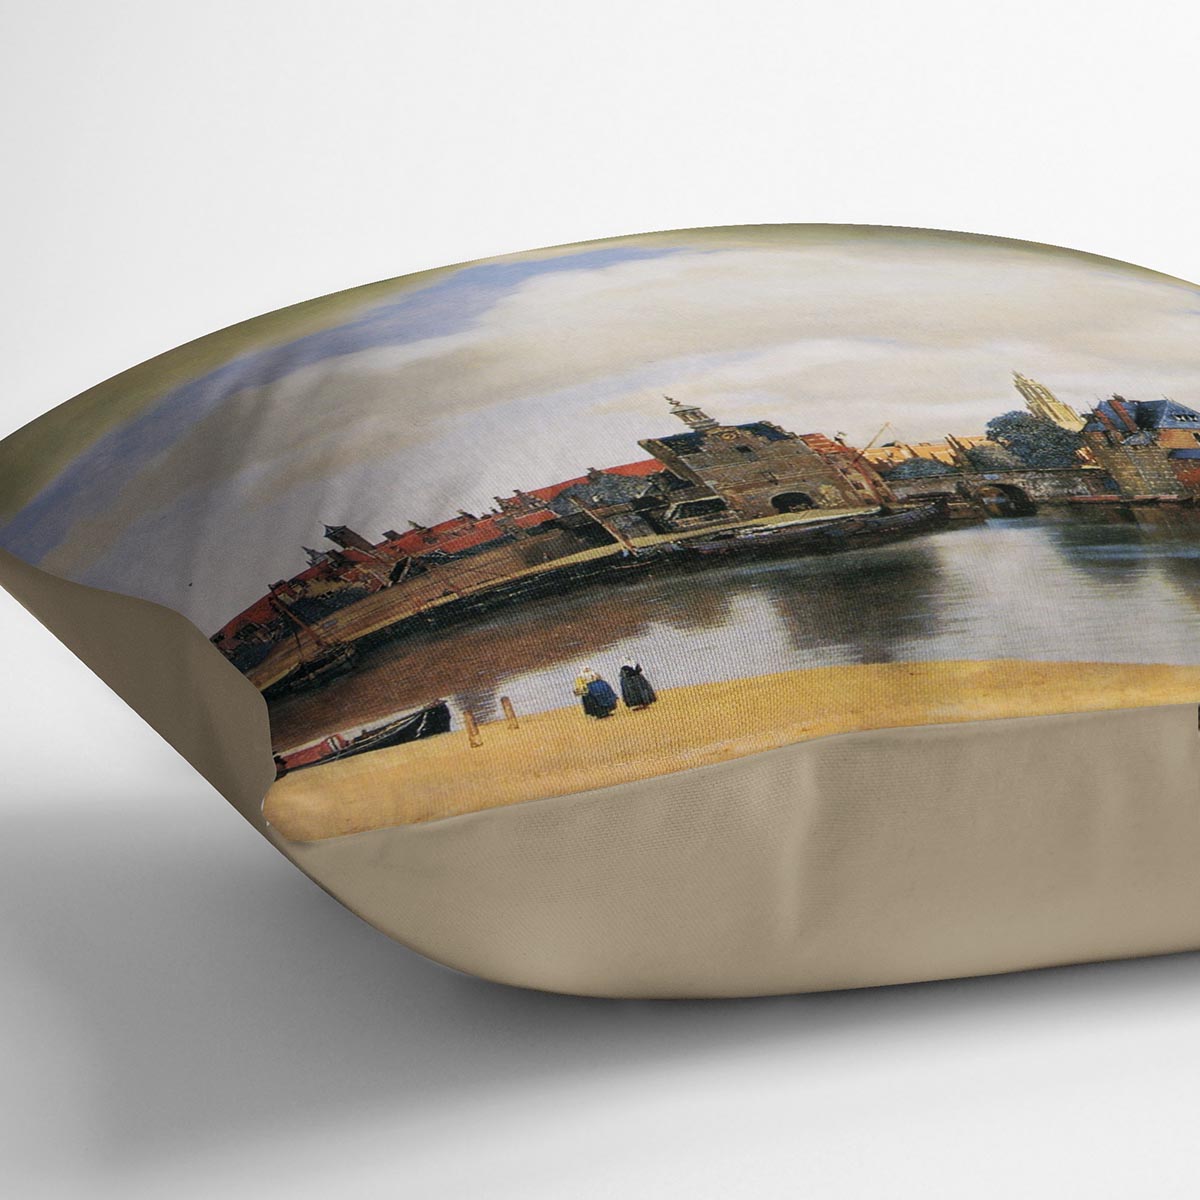 View of Delft by Vermeer Cushion